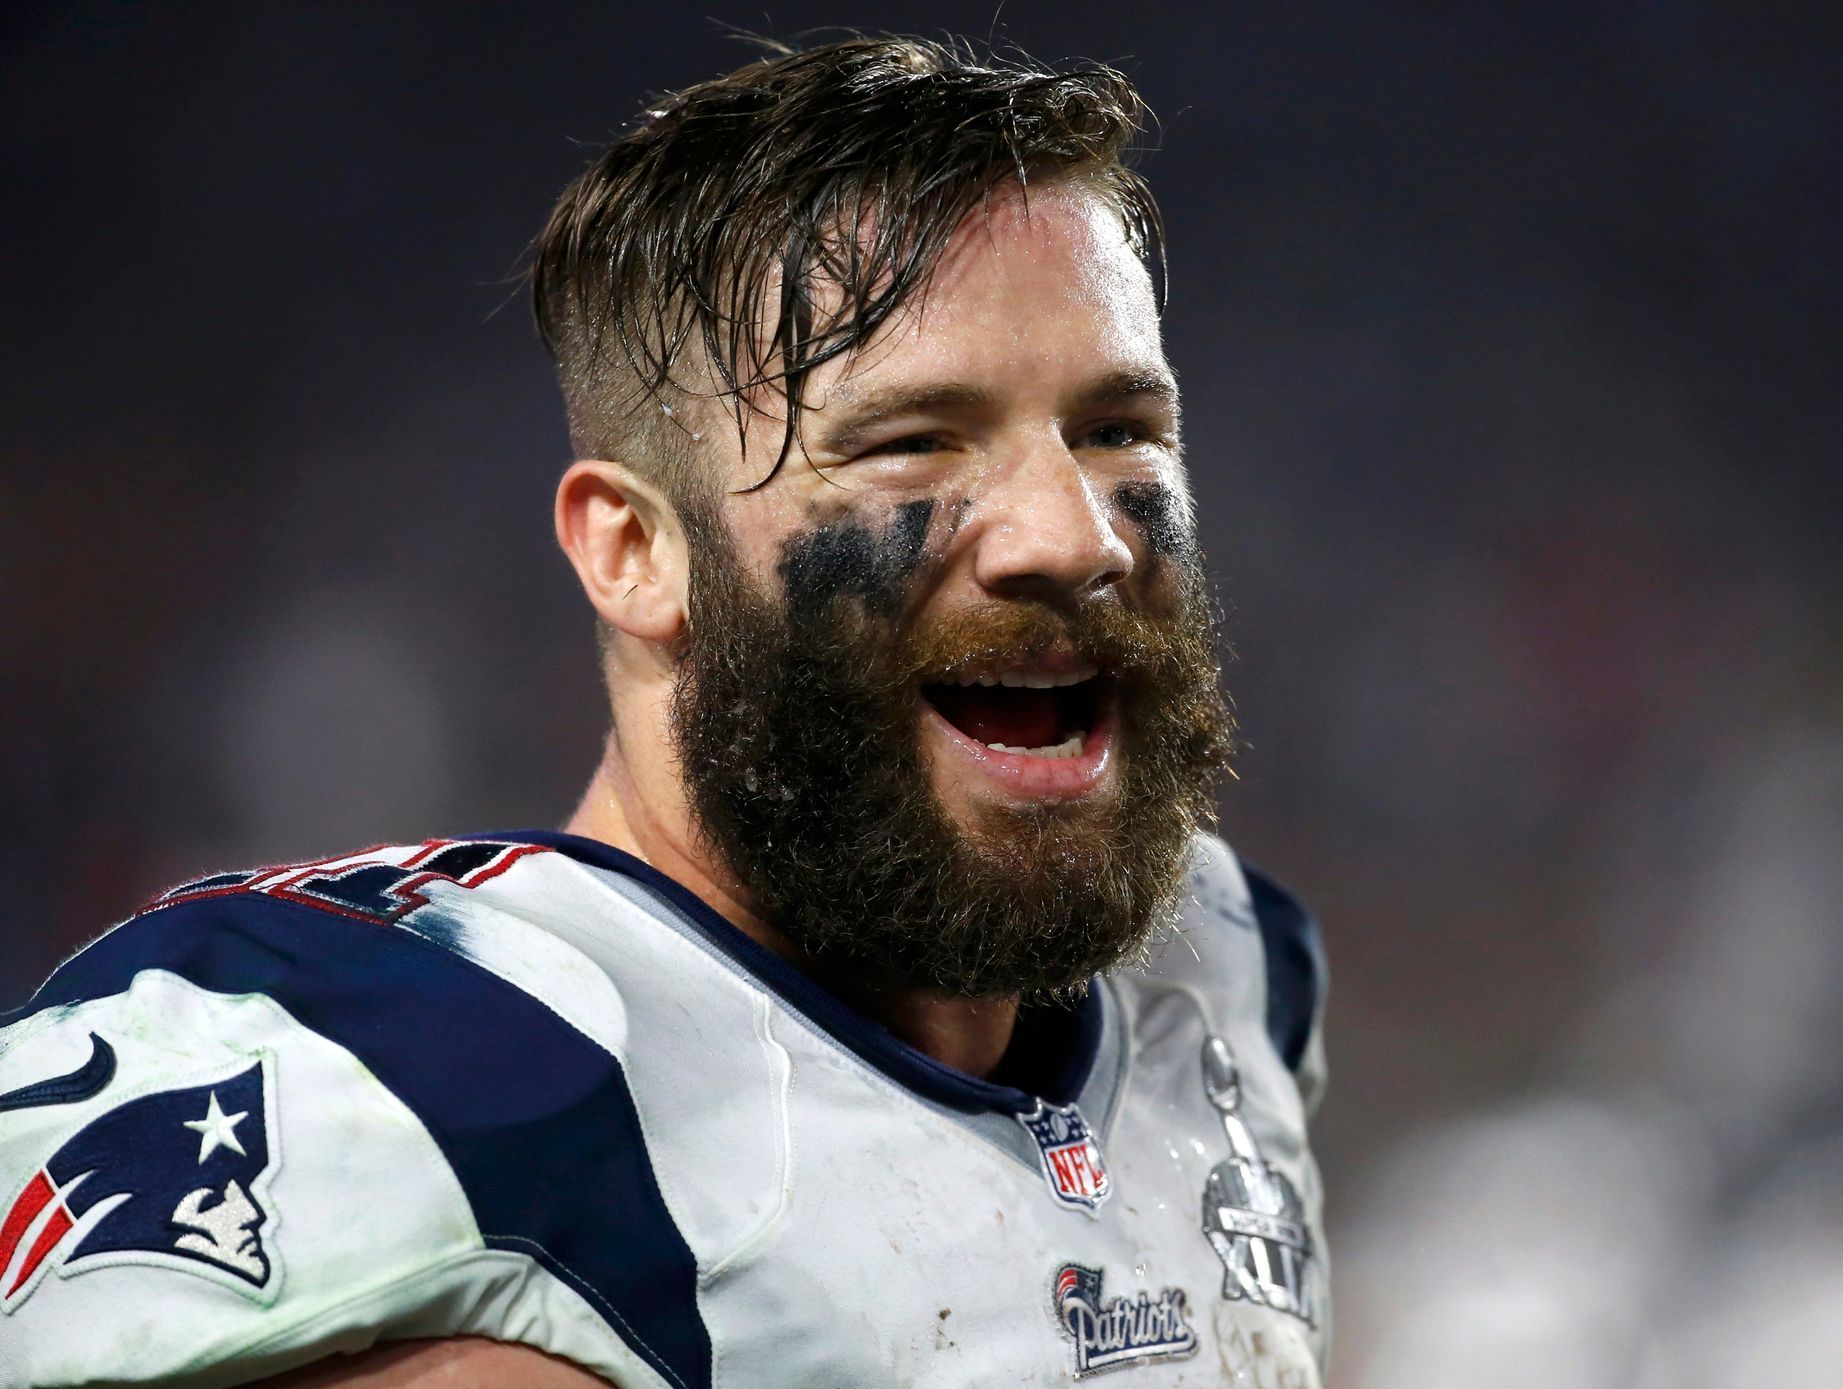 New England Patriots wide receiver Julian Edelman smiles on the sidelines during the NFL Super Bowl XLIX football game against the Seattle Seahawks in Glendale